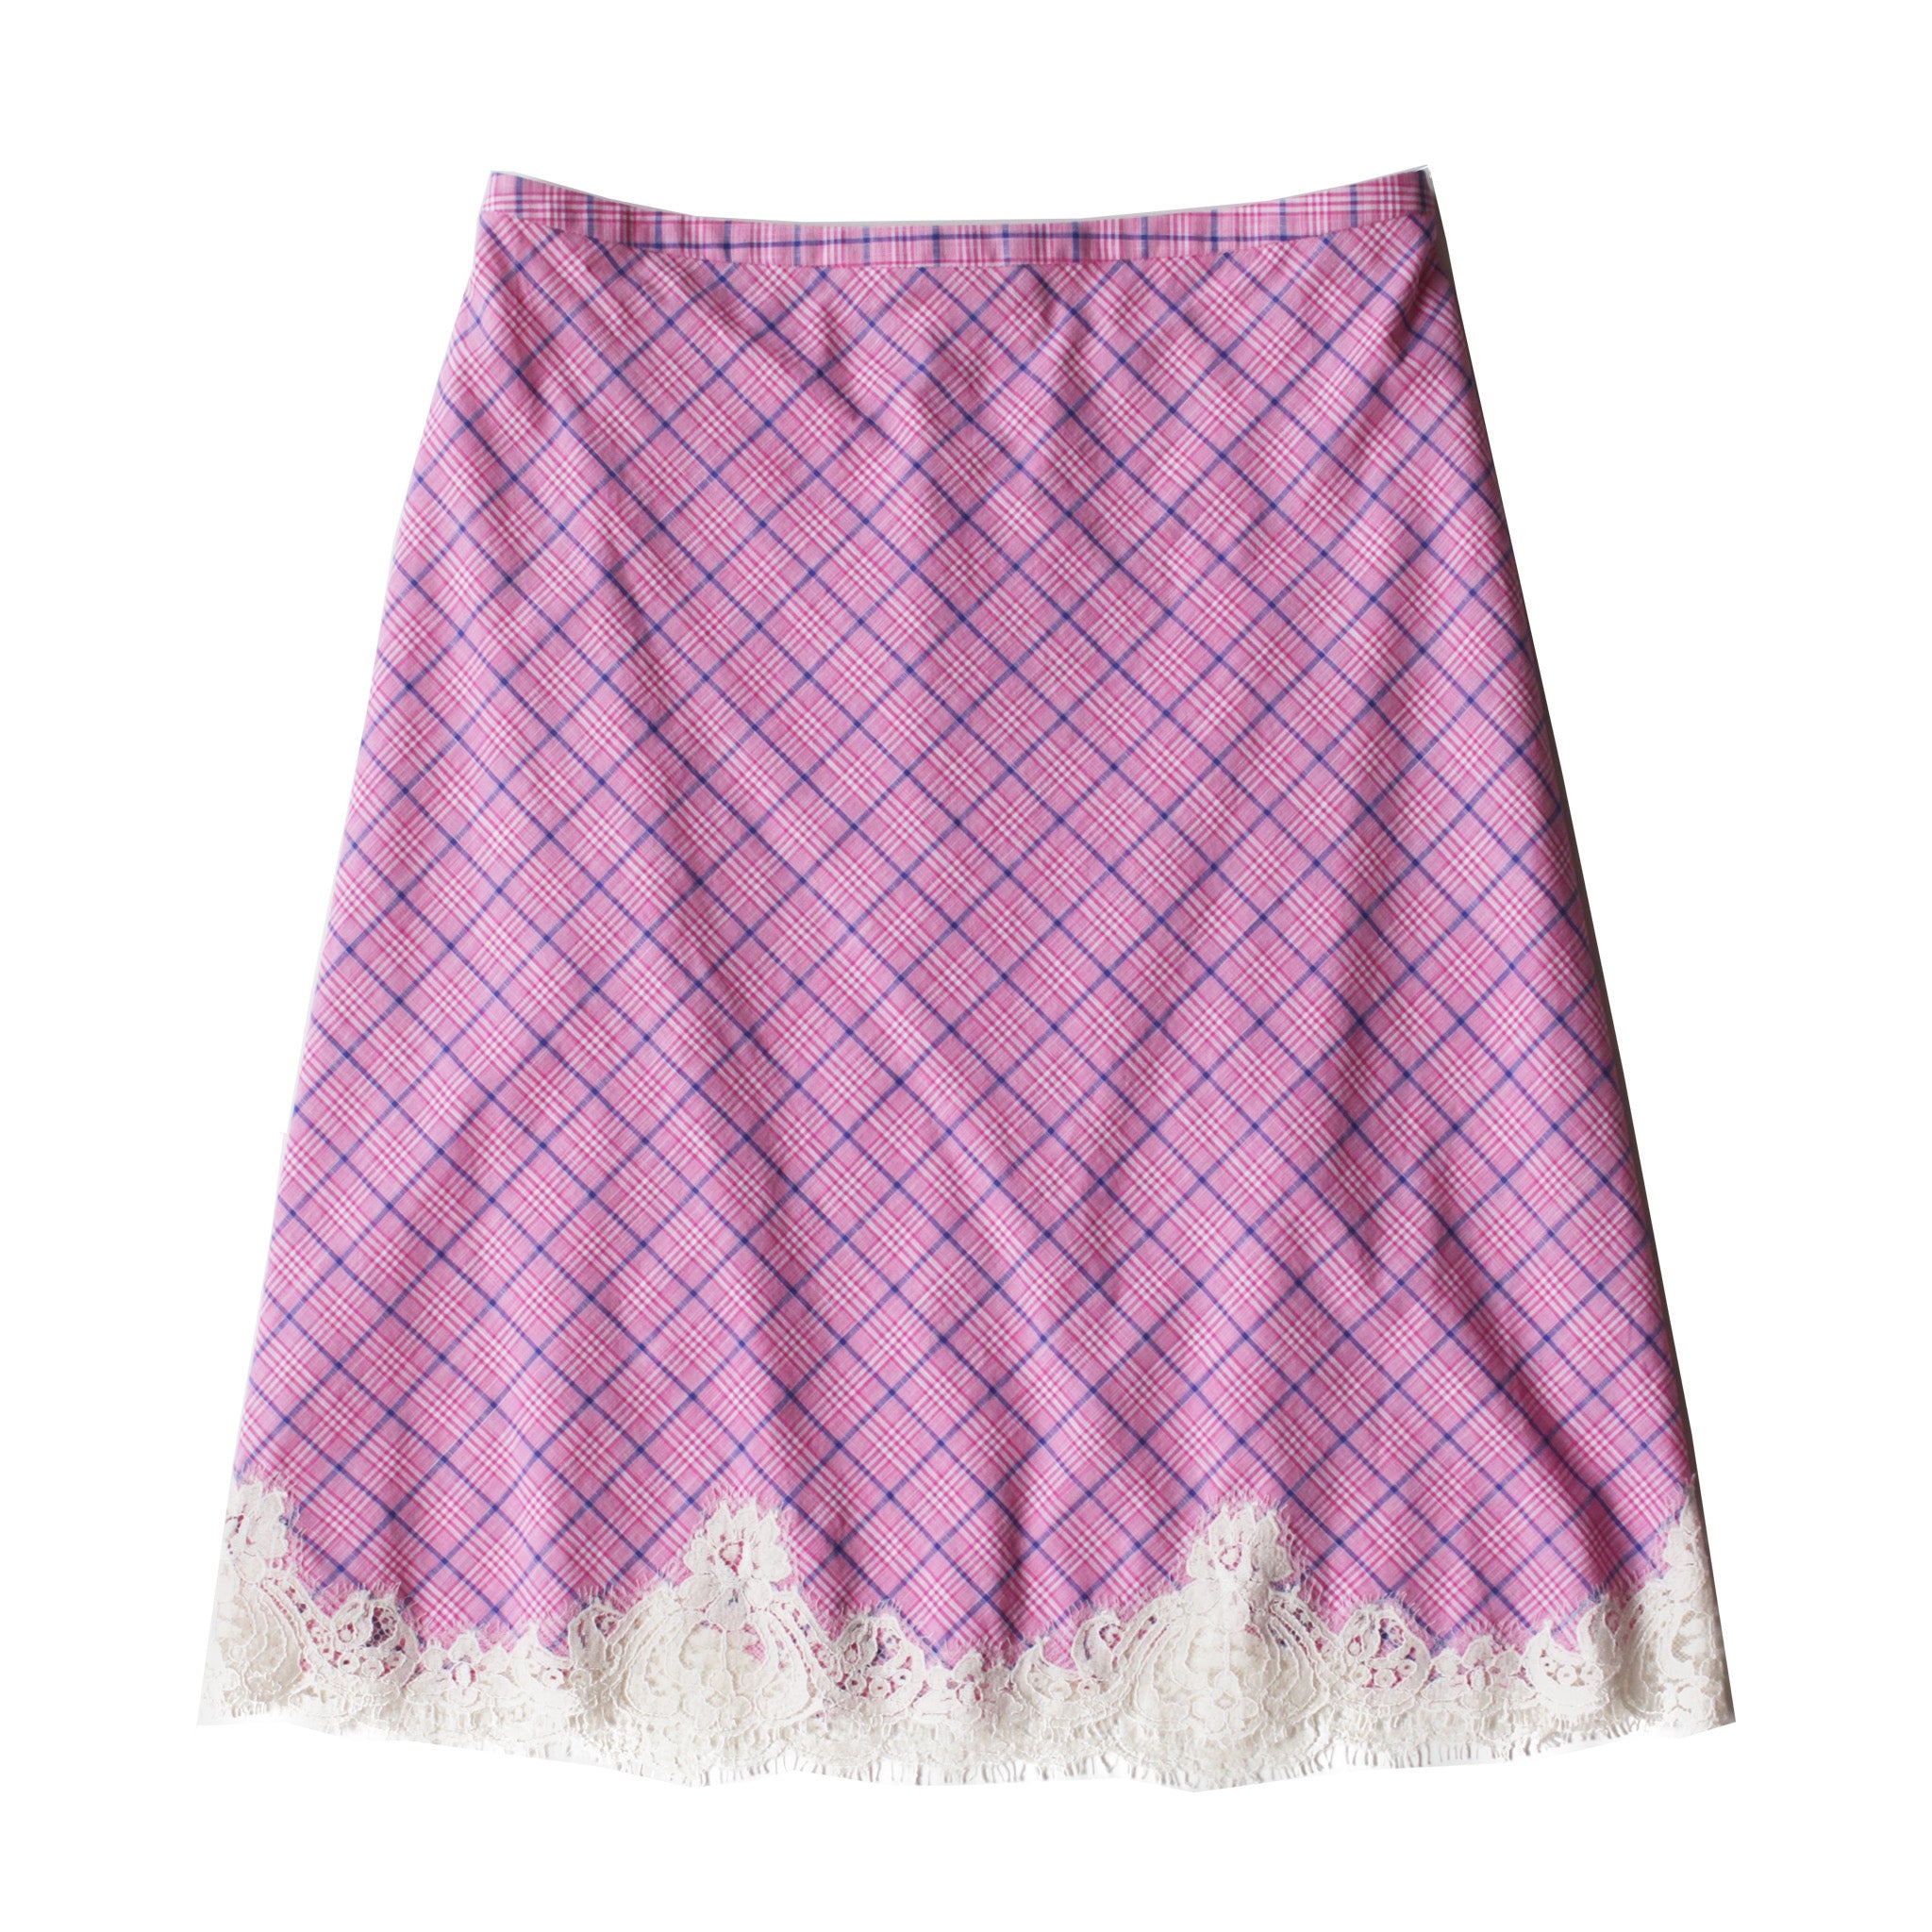 Kali Half Slip in Italian Cotton Pink Plaid with Lace